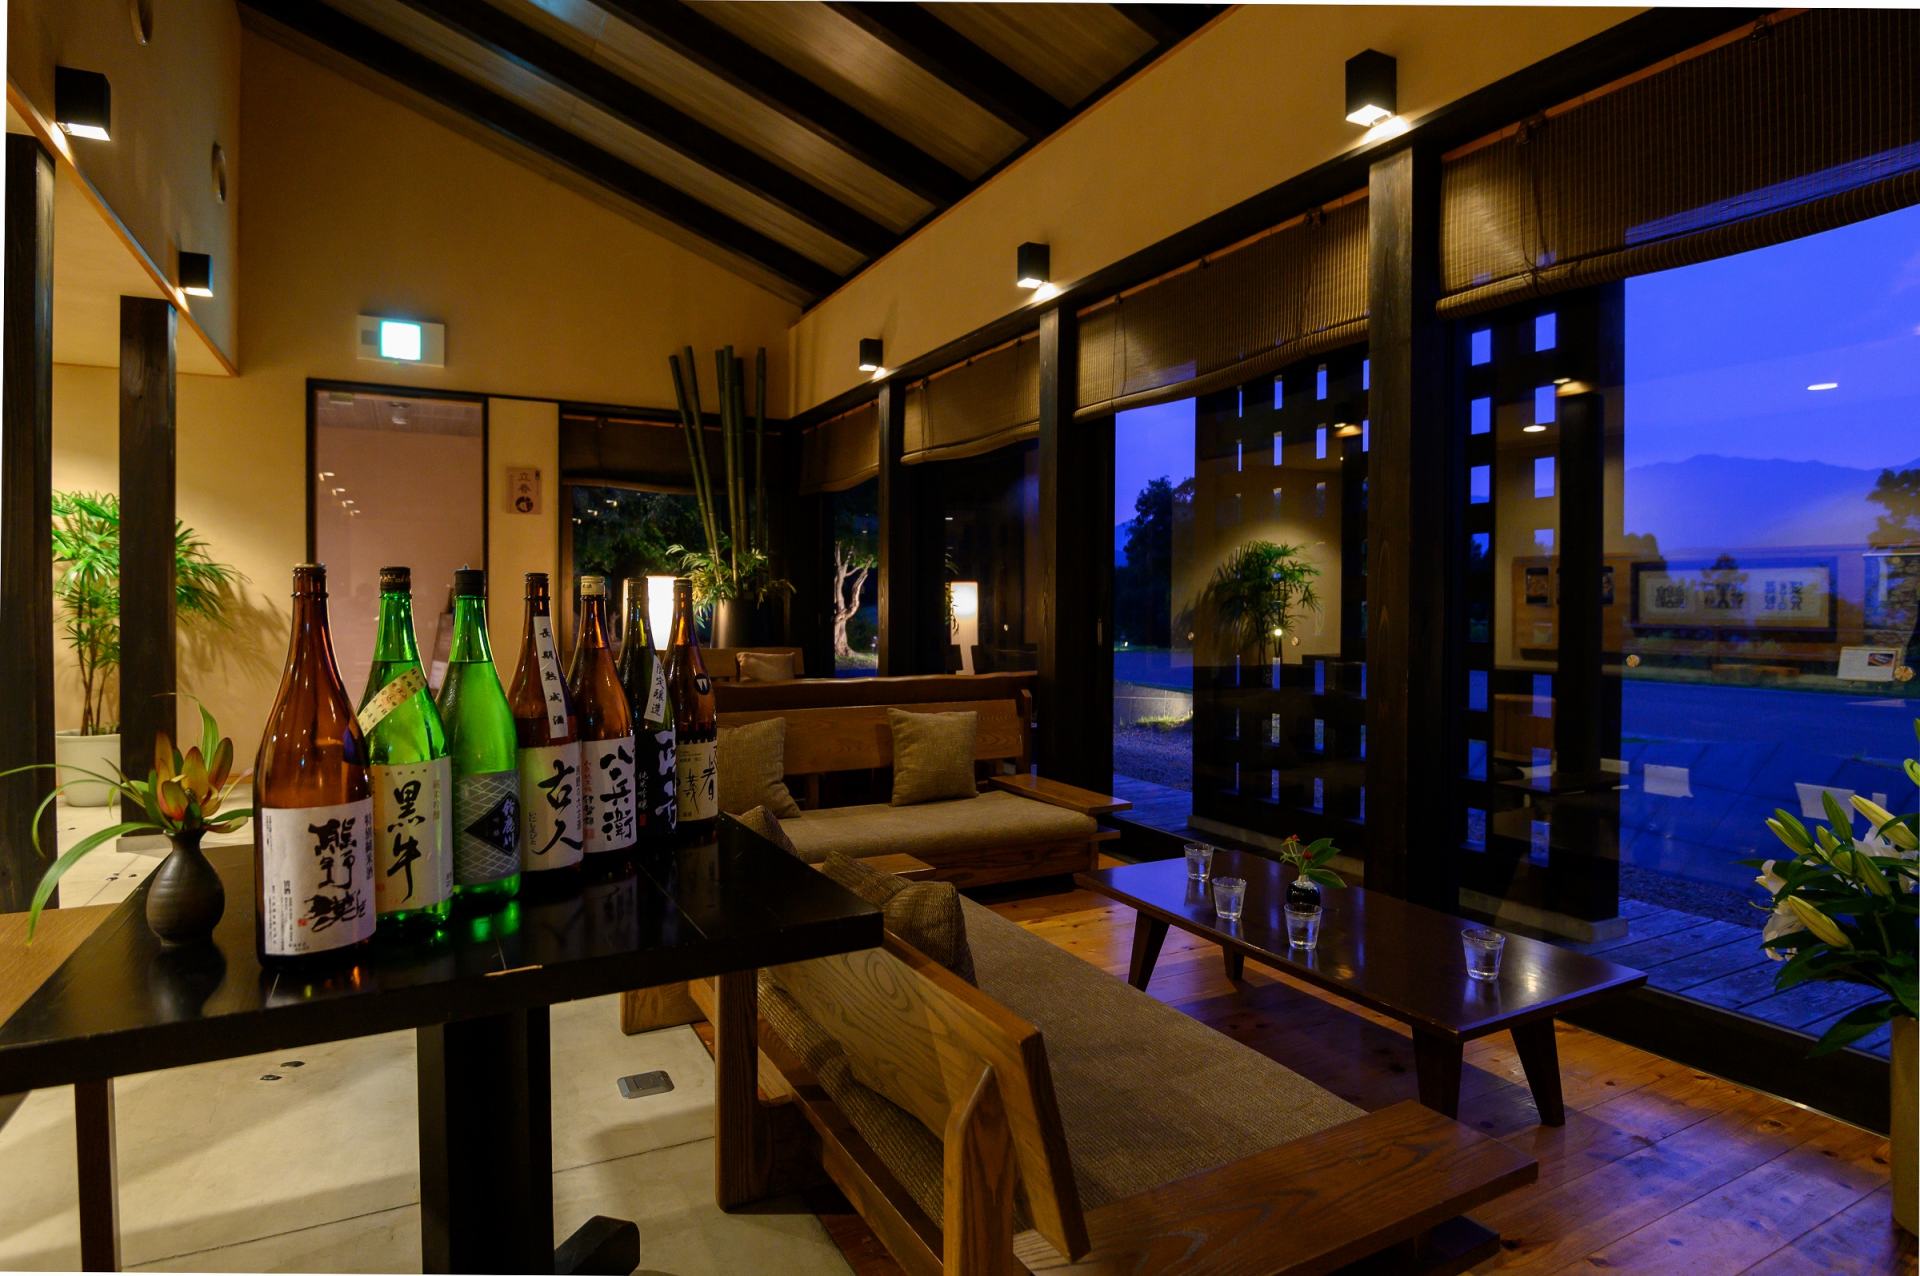 On the premises, there is also a lounge bar where you can savor the night sky and Japanese sake to your heart's content.